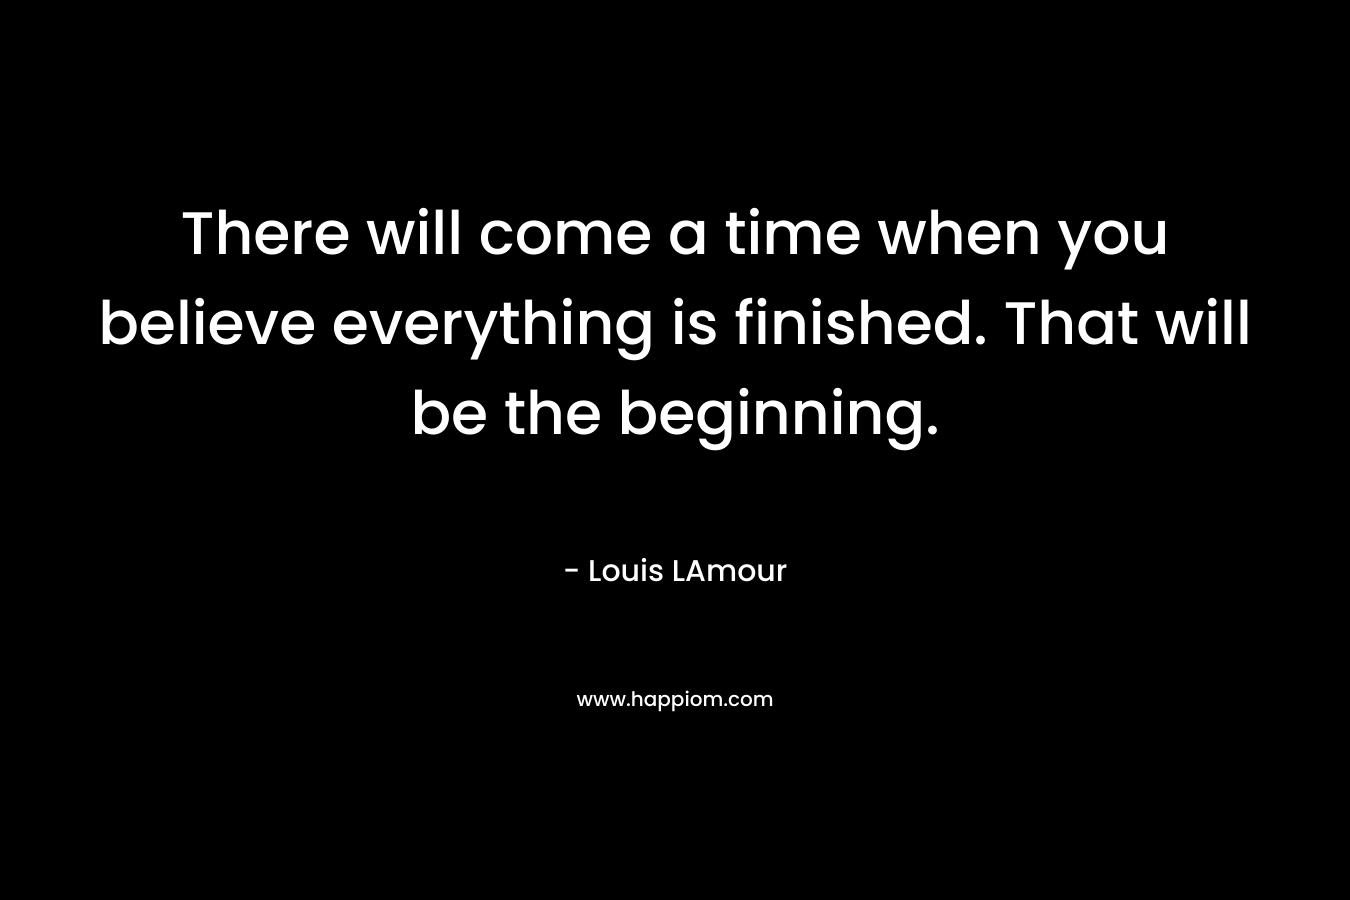 There will come a time when you believe everything is finished. That will be the beginning.